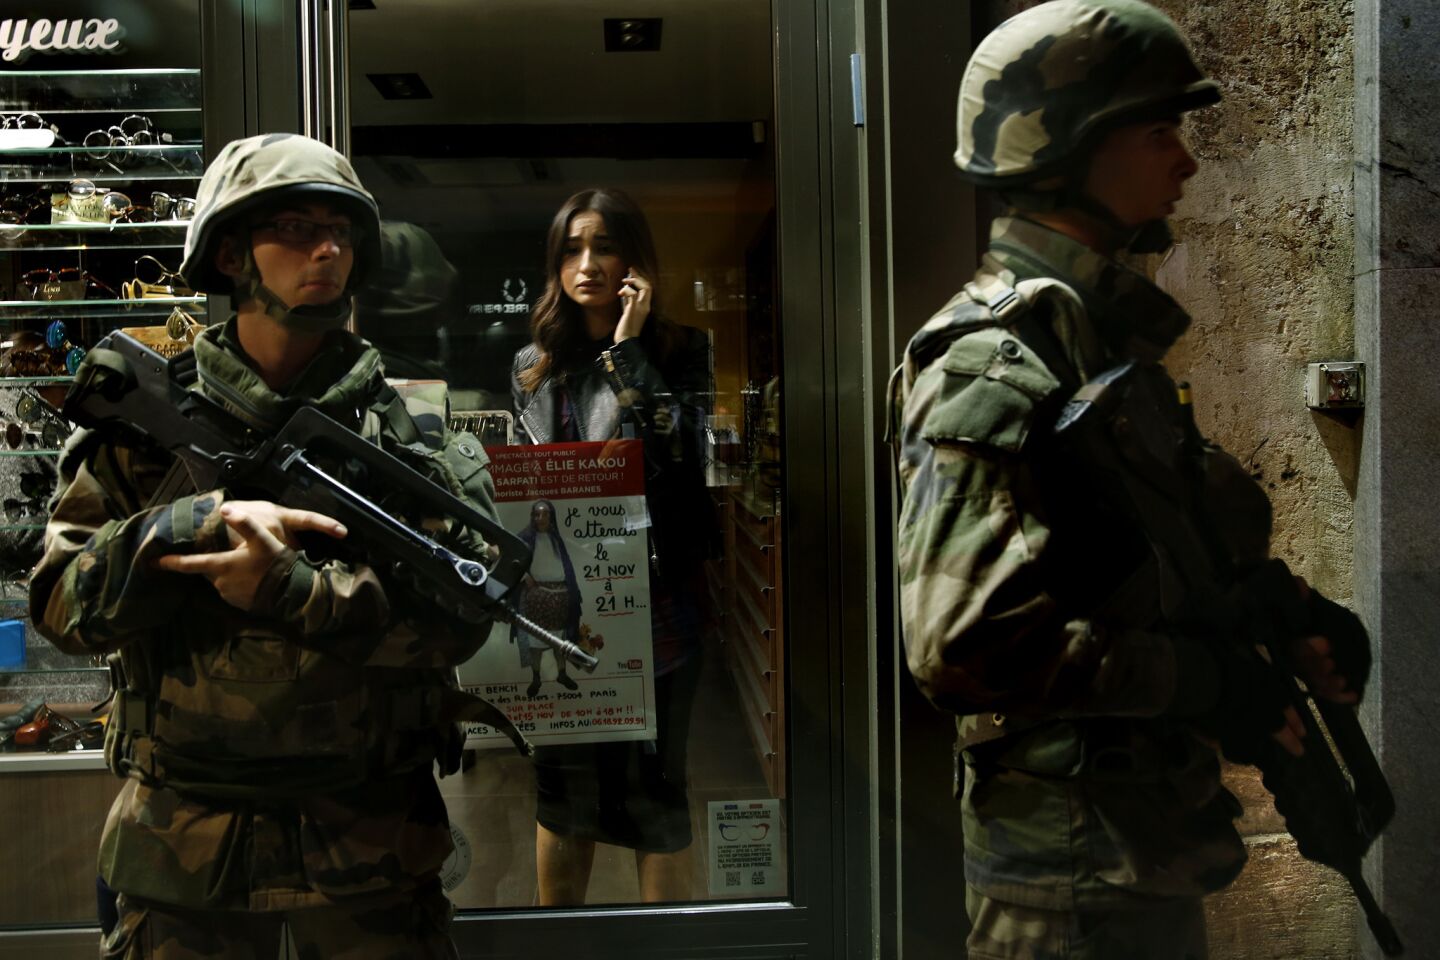 A Paris shopkeeper stays inside Sunday as soldiers guard the street where she works.